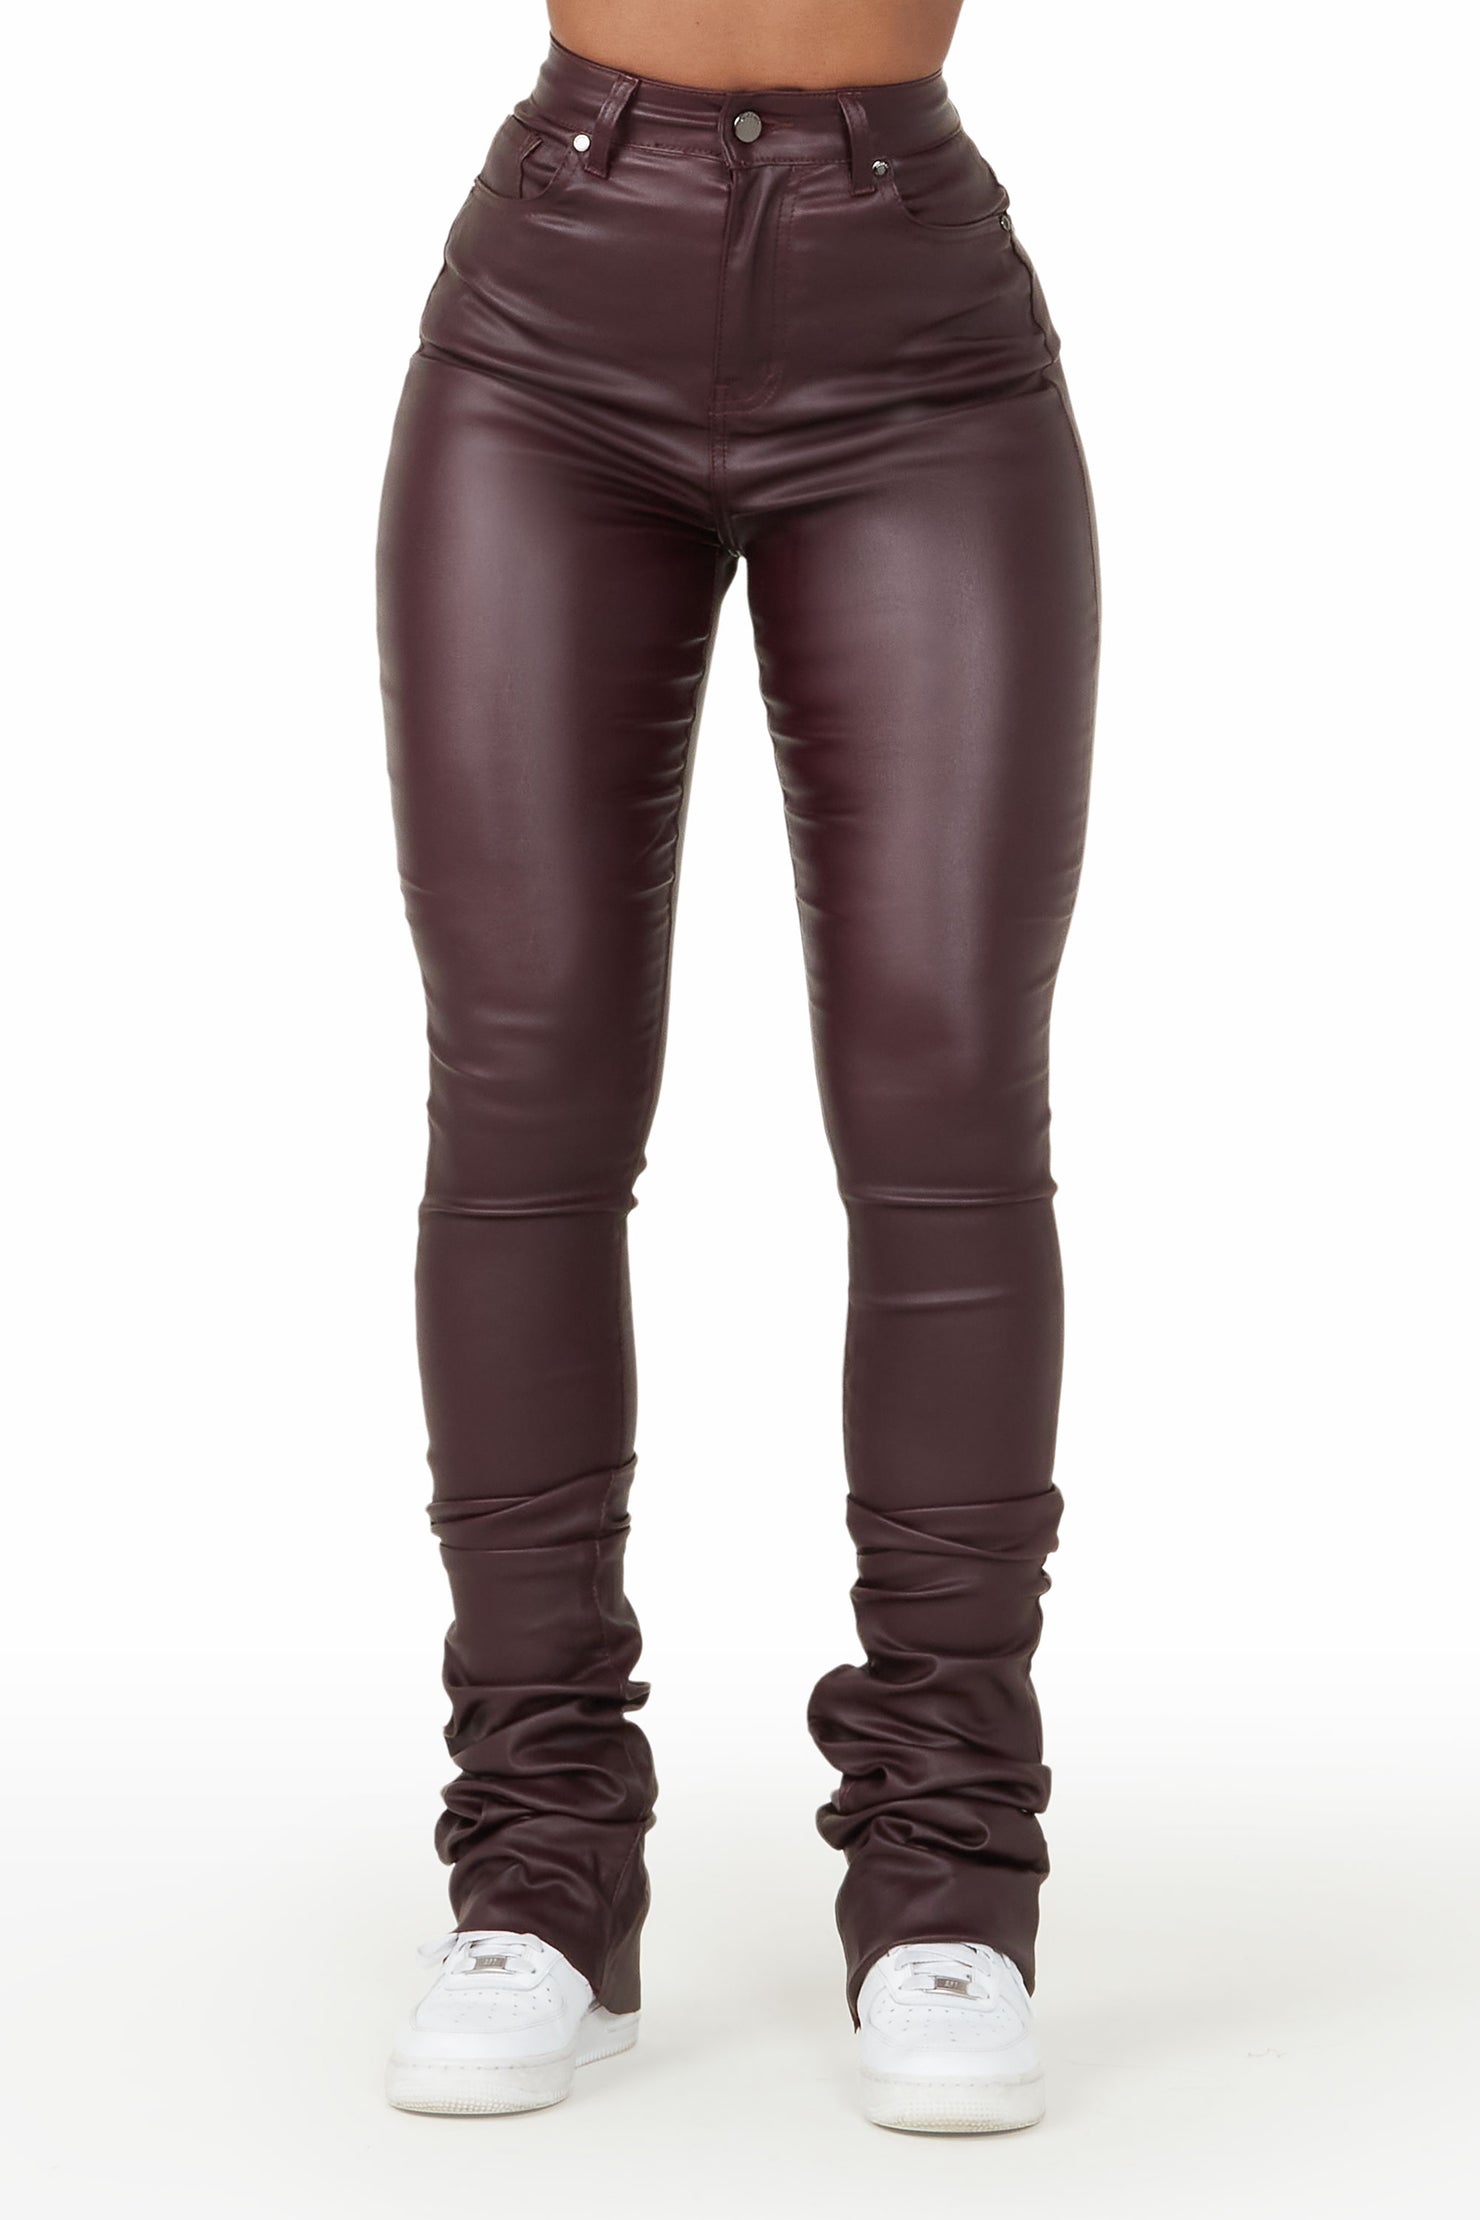  Women Pocket Faux Leather Pants Leggings Pants High Waisted  Leather Stacked Pants Wine XL